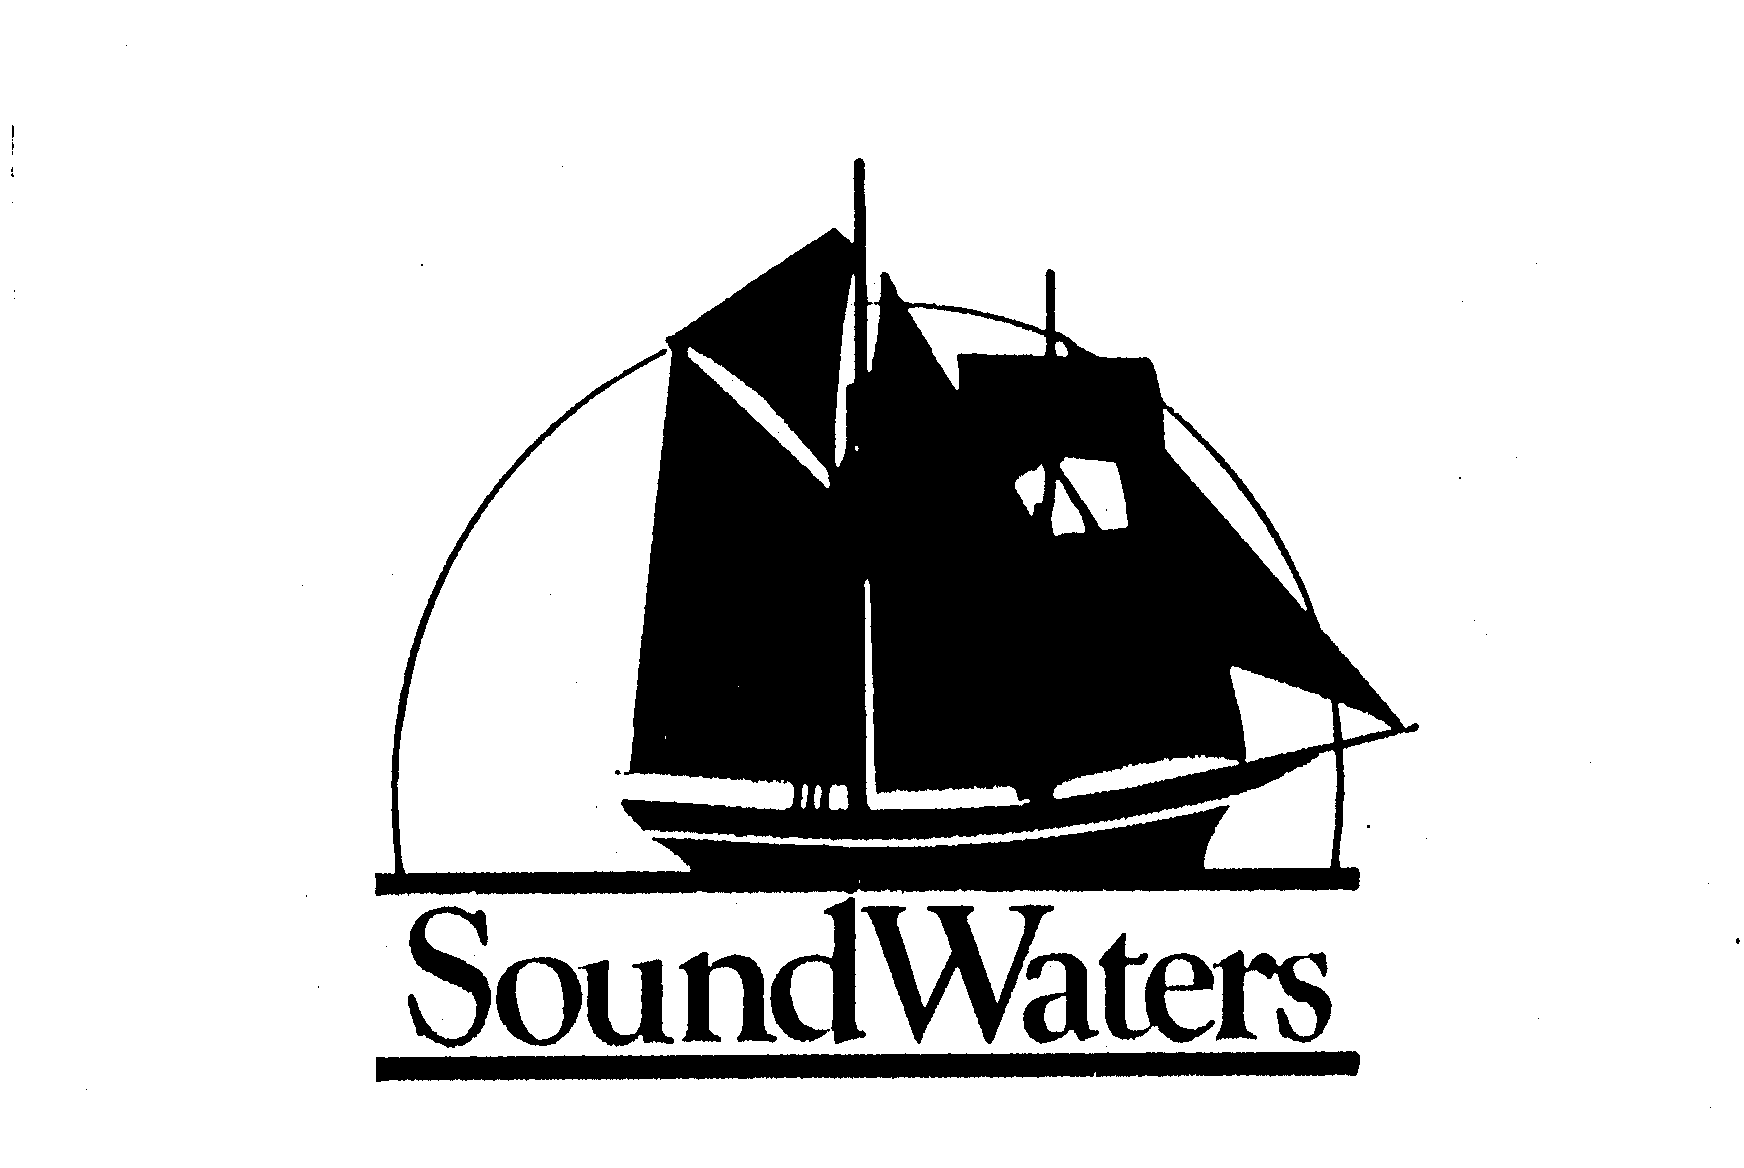 SOUNDWATERS